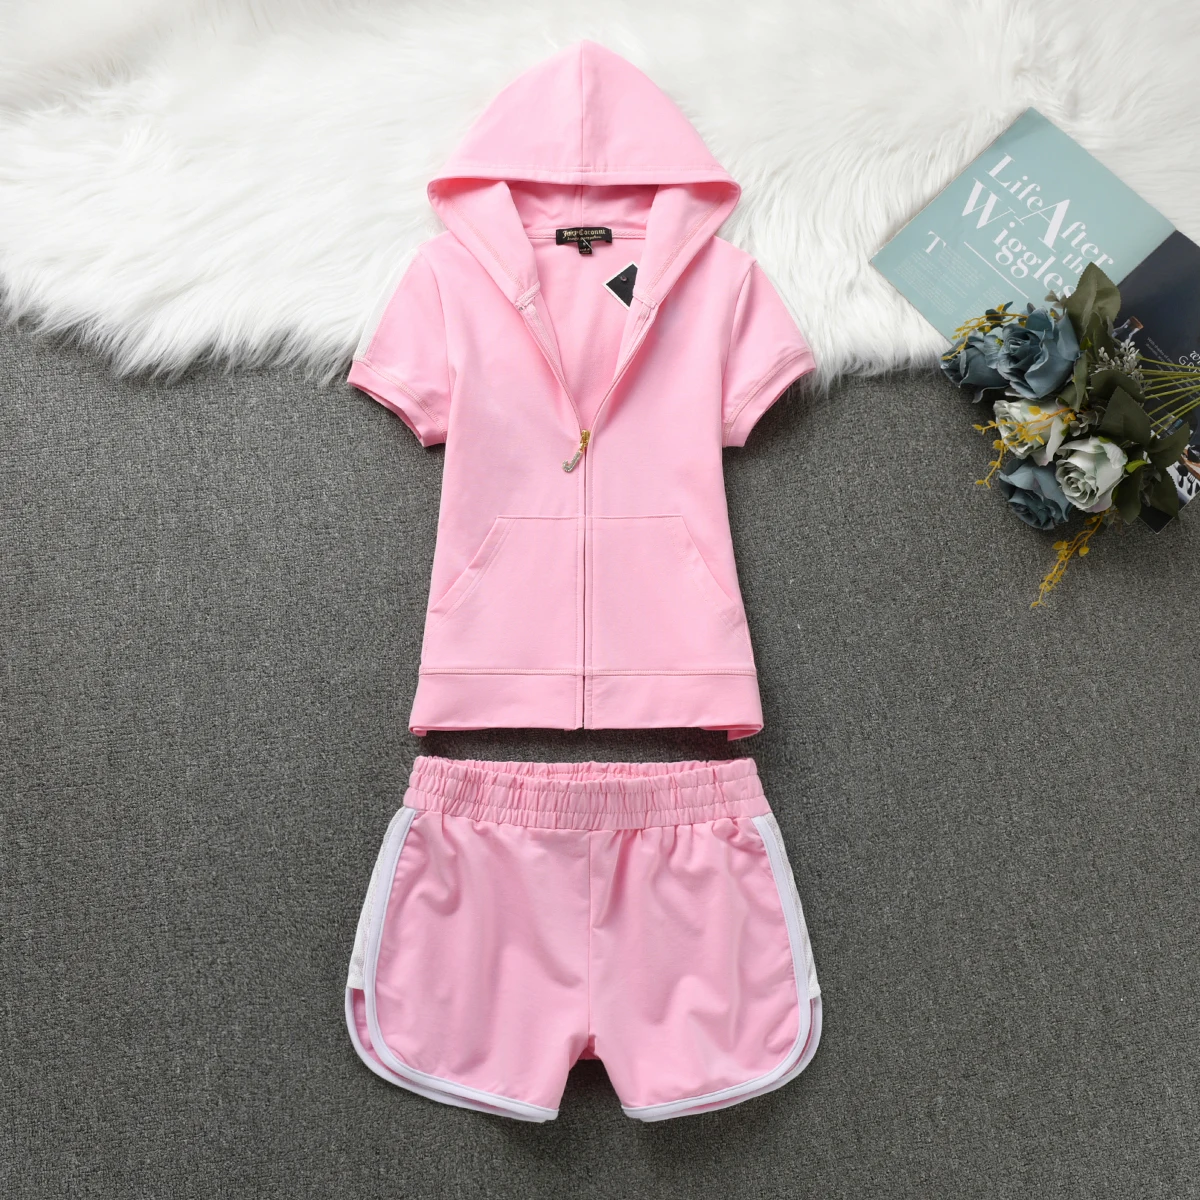 

Juicy Cometure 100% Cotton Women's Summer Casual Suit Short-Sleeved Hooded Top Ultra Short Riddle Shorts Sports Hooded 2pc